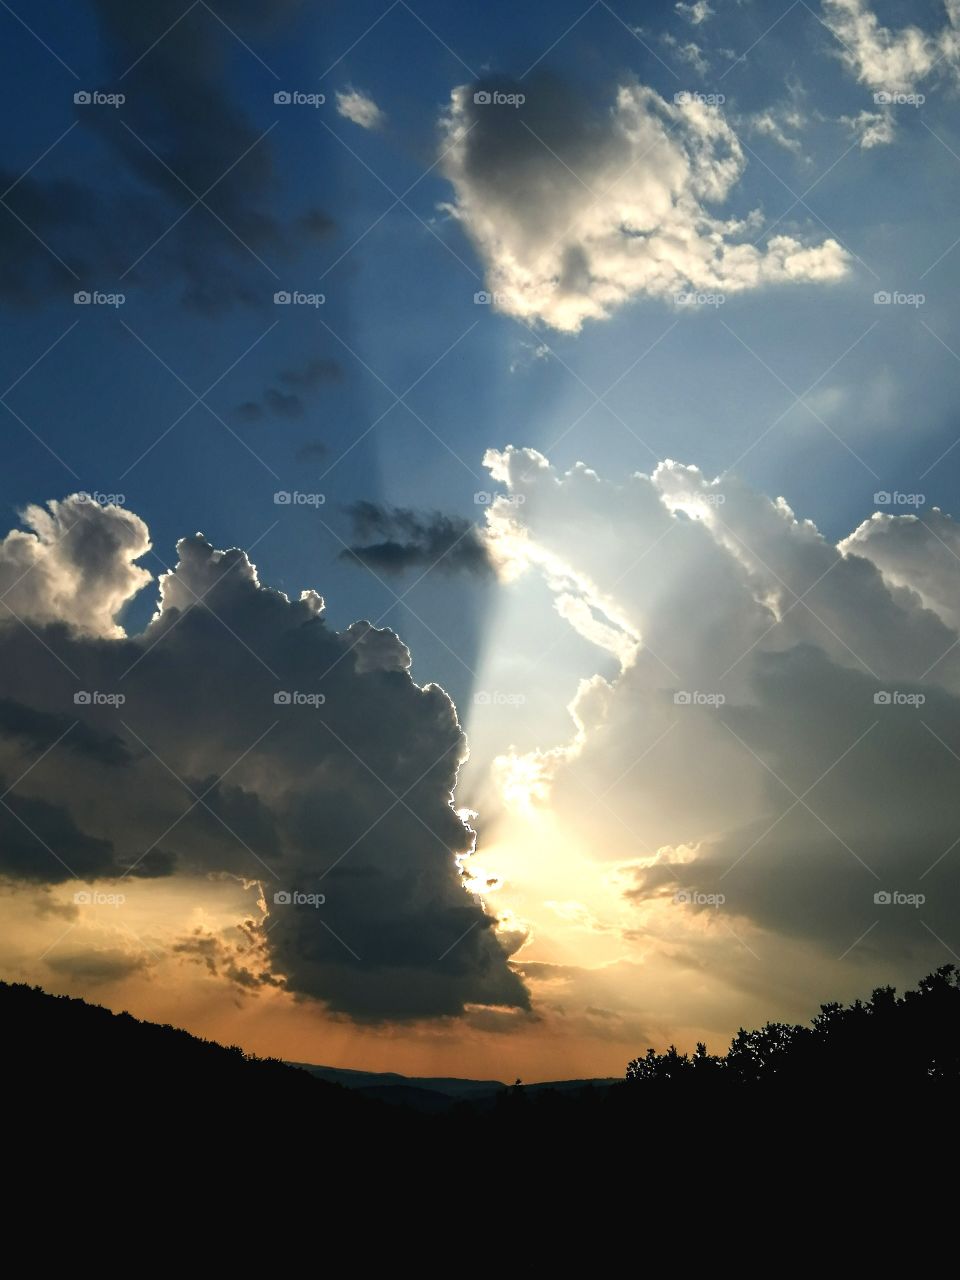 Sunset, clouds divided into light and dark side